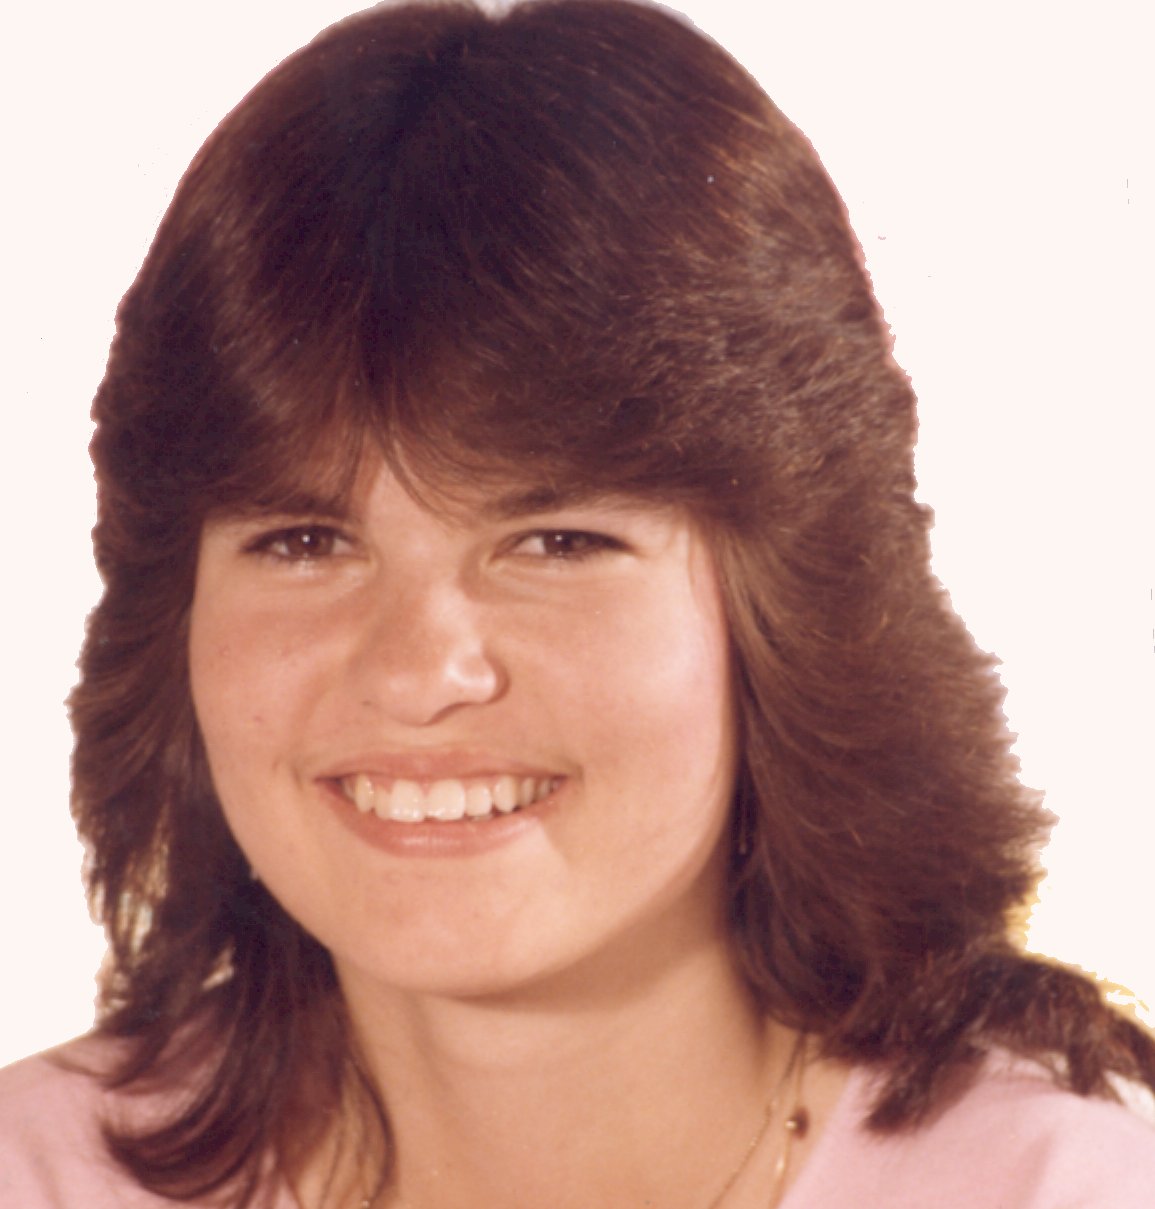 Missing person Megan Louise Mulquiney (born 29 November 1966), missing since 1984.